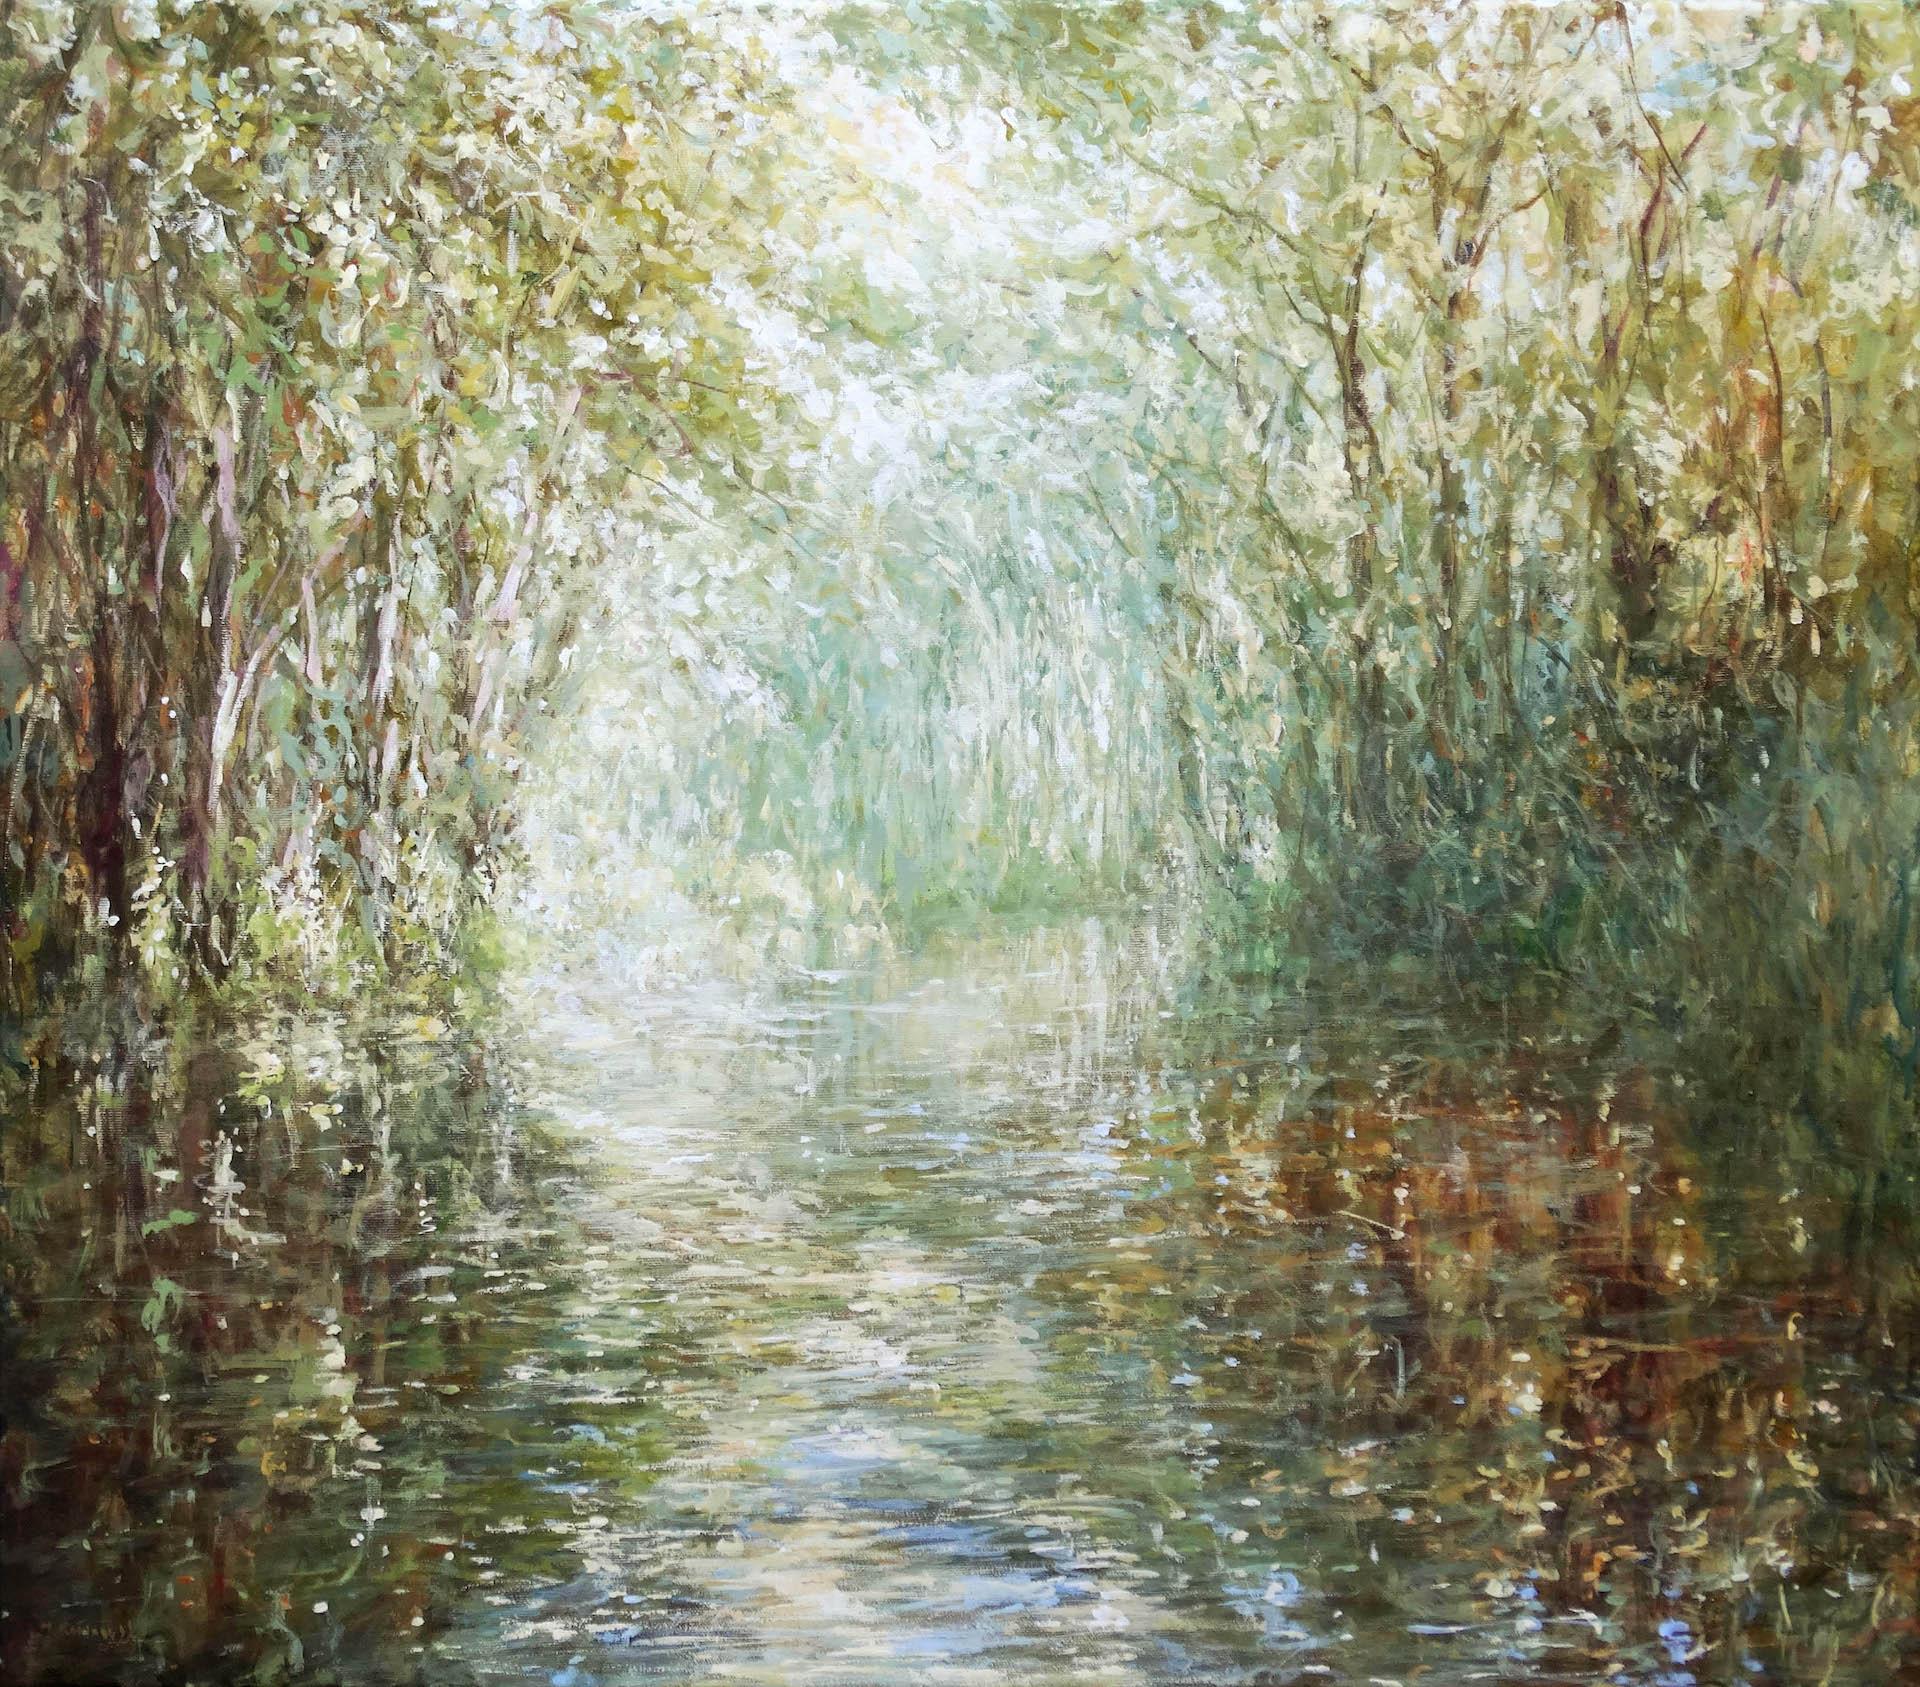 Mariusz Kaldowski
Forest River
Original Painting
Acrylic Paint on Canvas
Sold Unframed
Framed Size: H 80cm x W 90cm
Please note that in situ images are purely an indication of how a piece may look.

Forest River is an impressionistic depiction of a